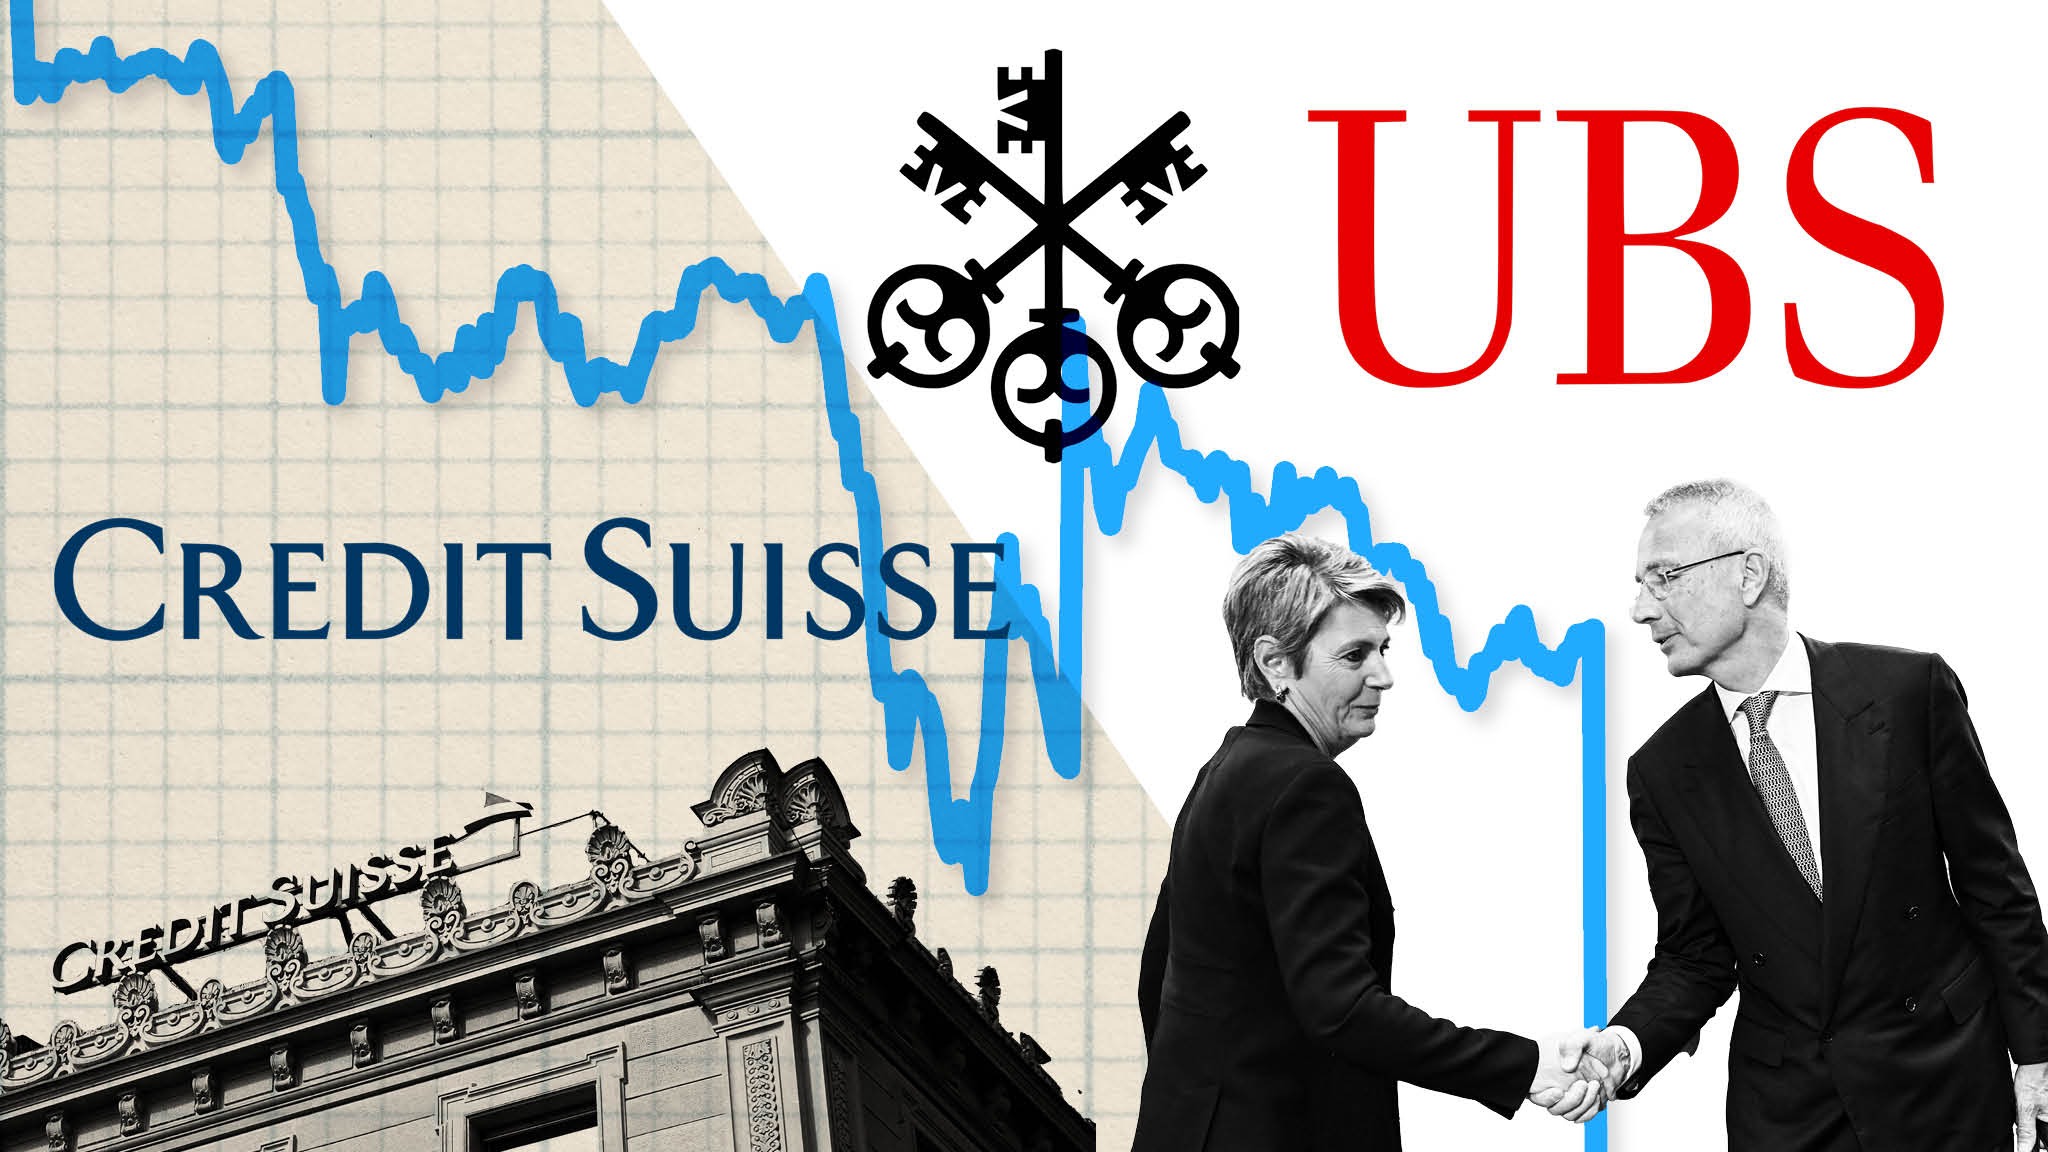 UBS Acquisition of Credit Suisse to Finalize on Monday, Credit Suisse CEO's Memo Indicates